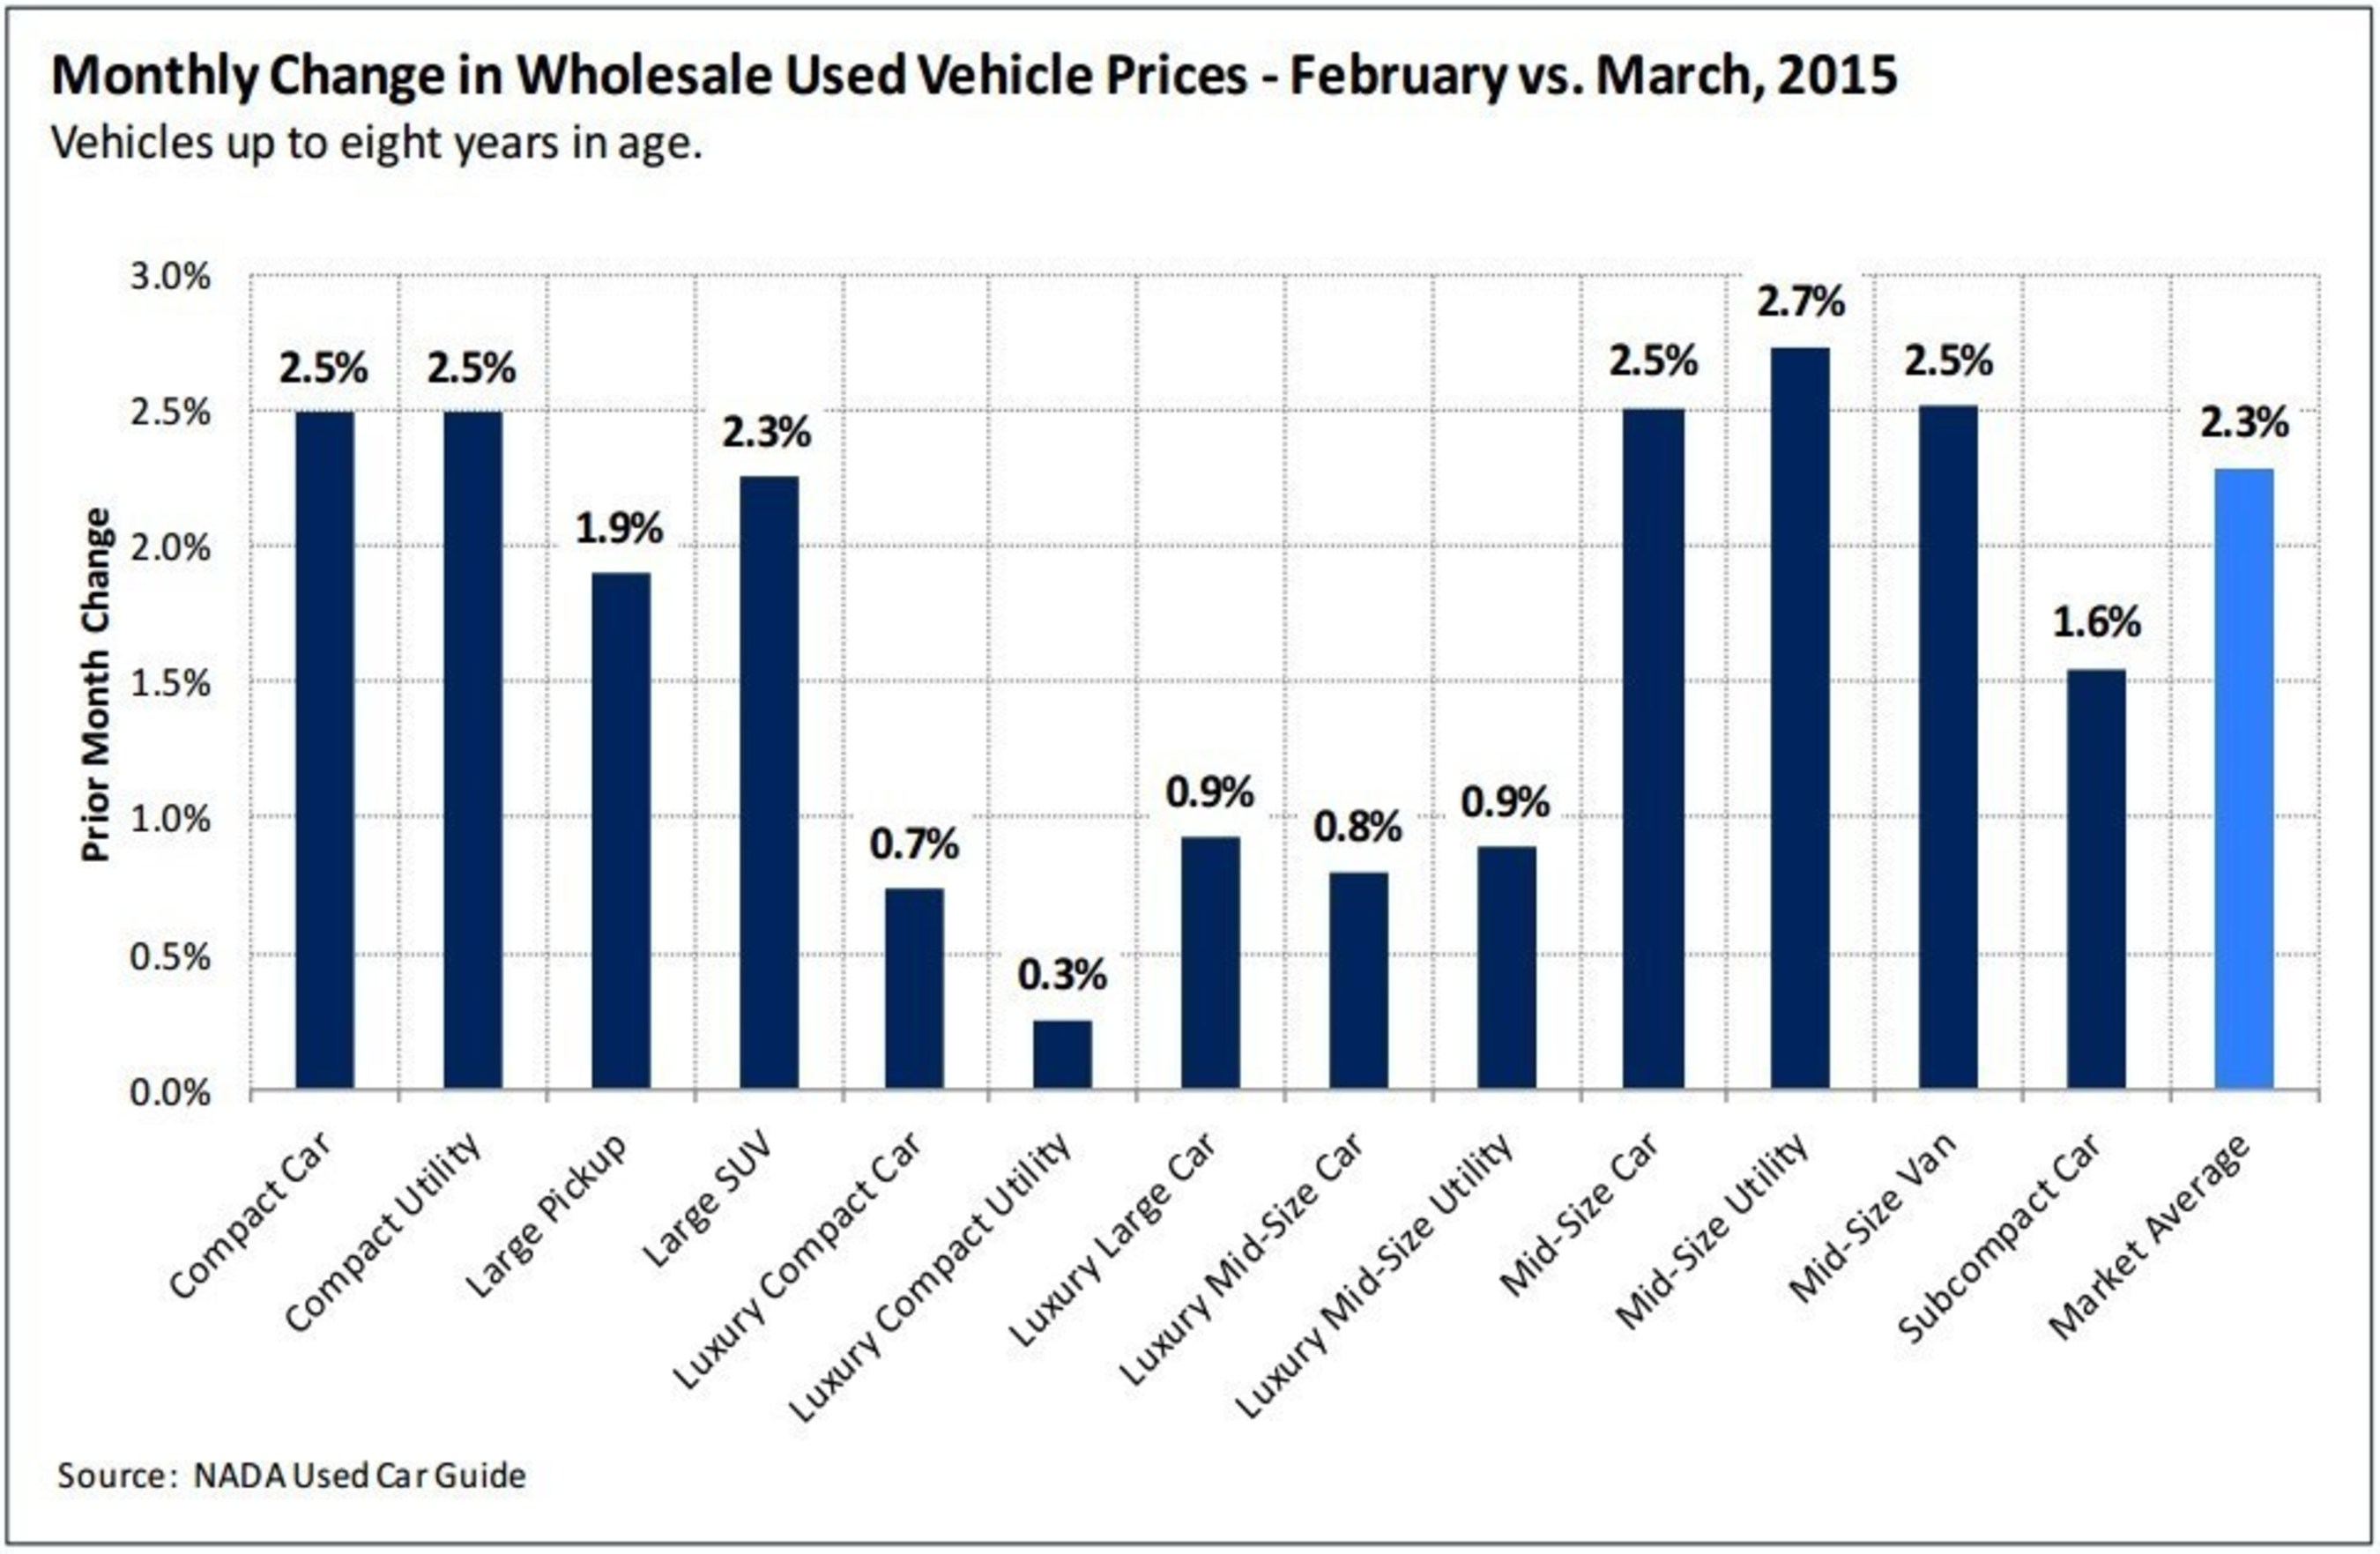 Wholesale prices grew by 2.3% in March, which is the highest increase recorded since March 2014.